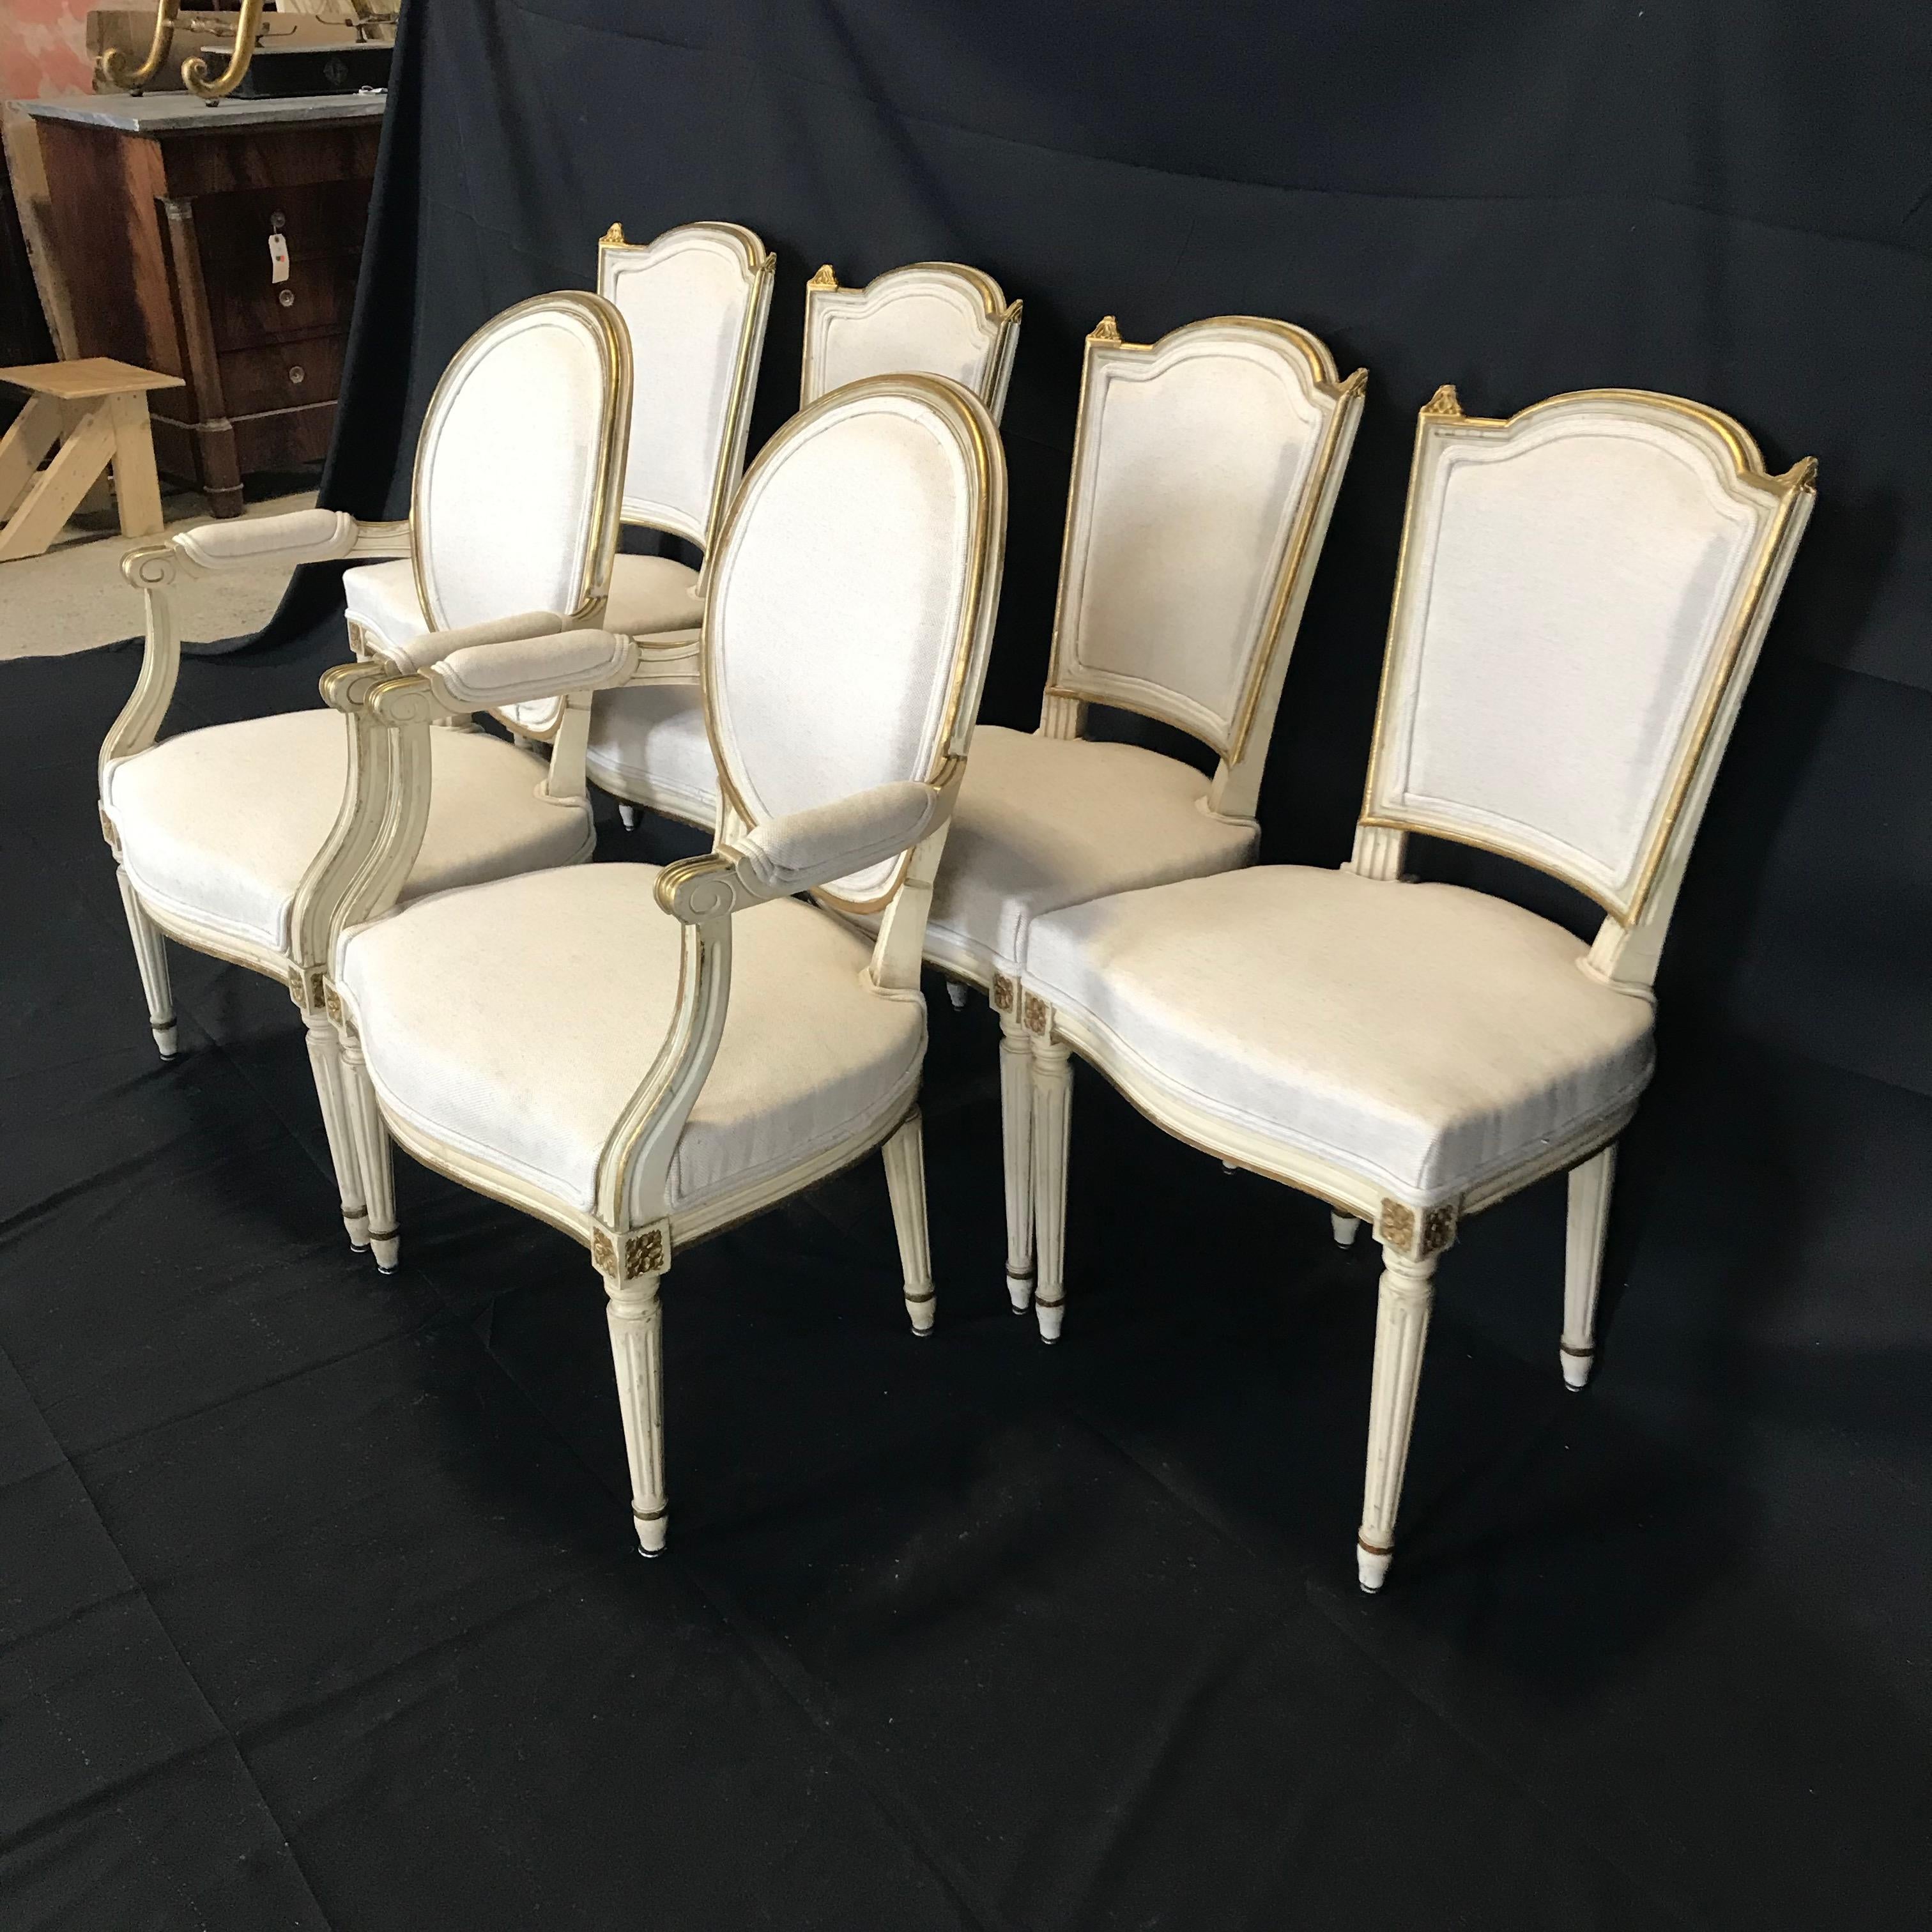 antique style chairs